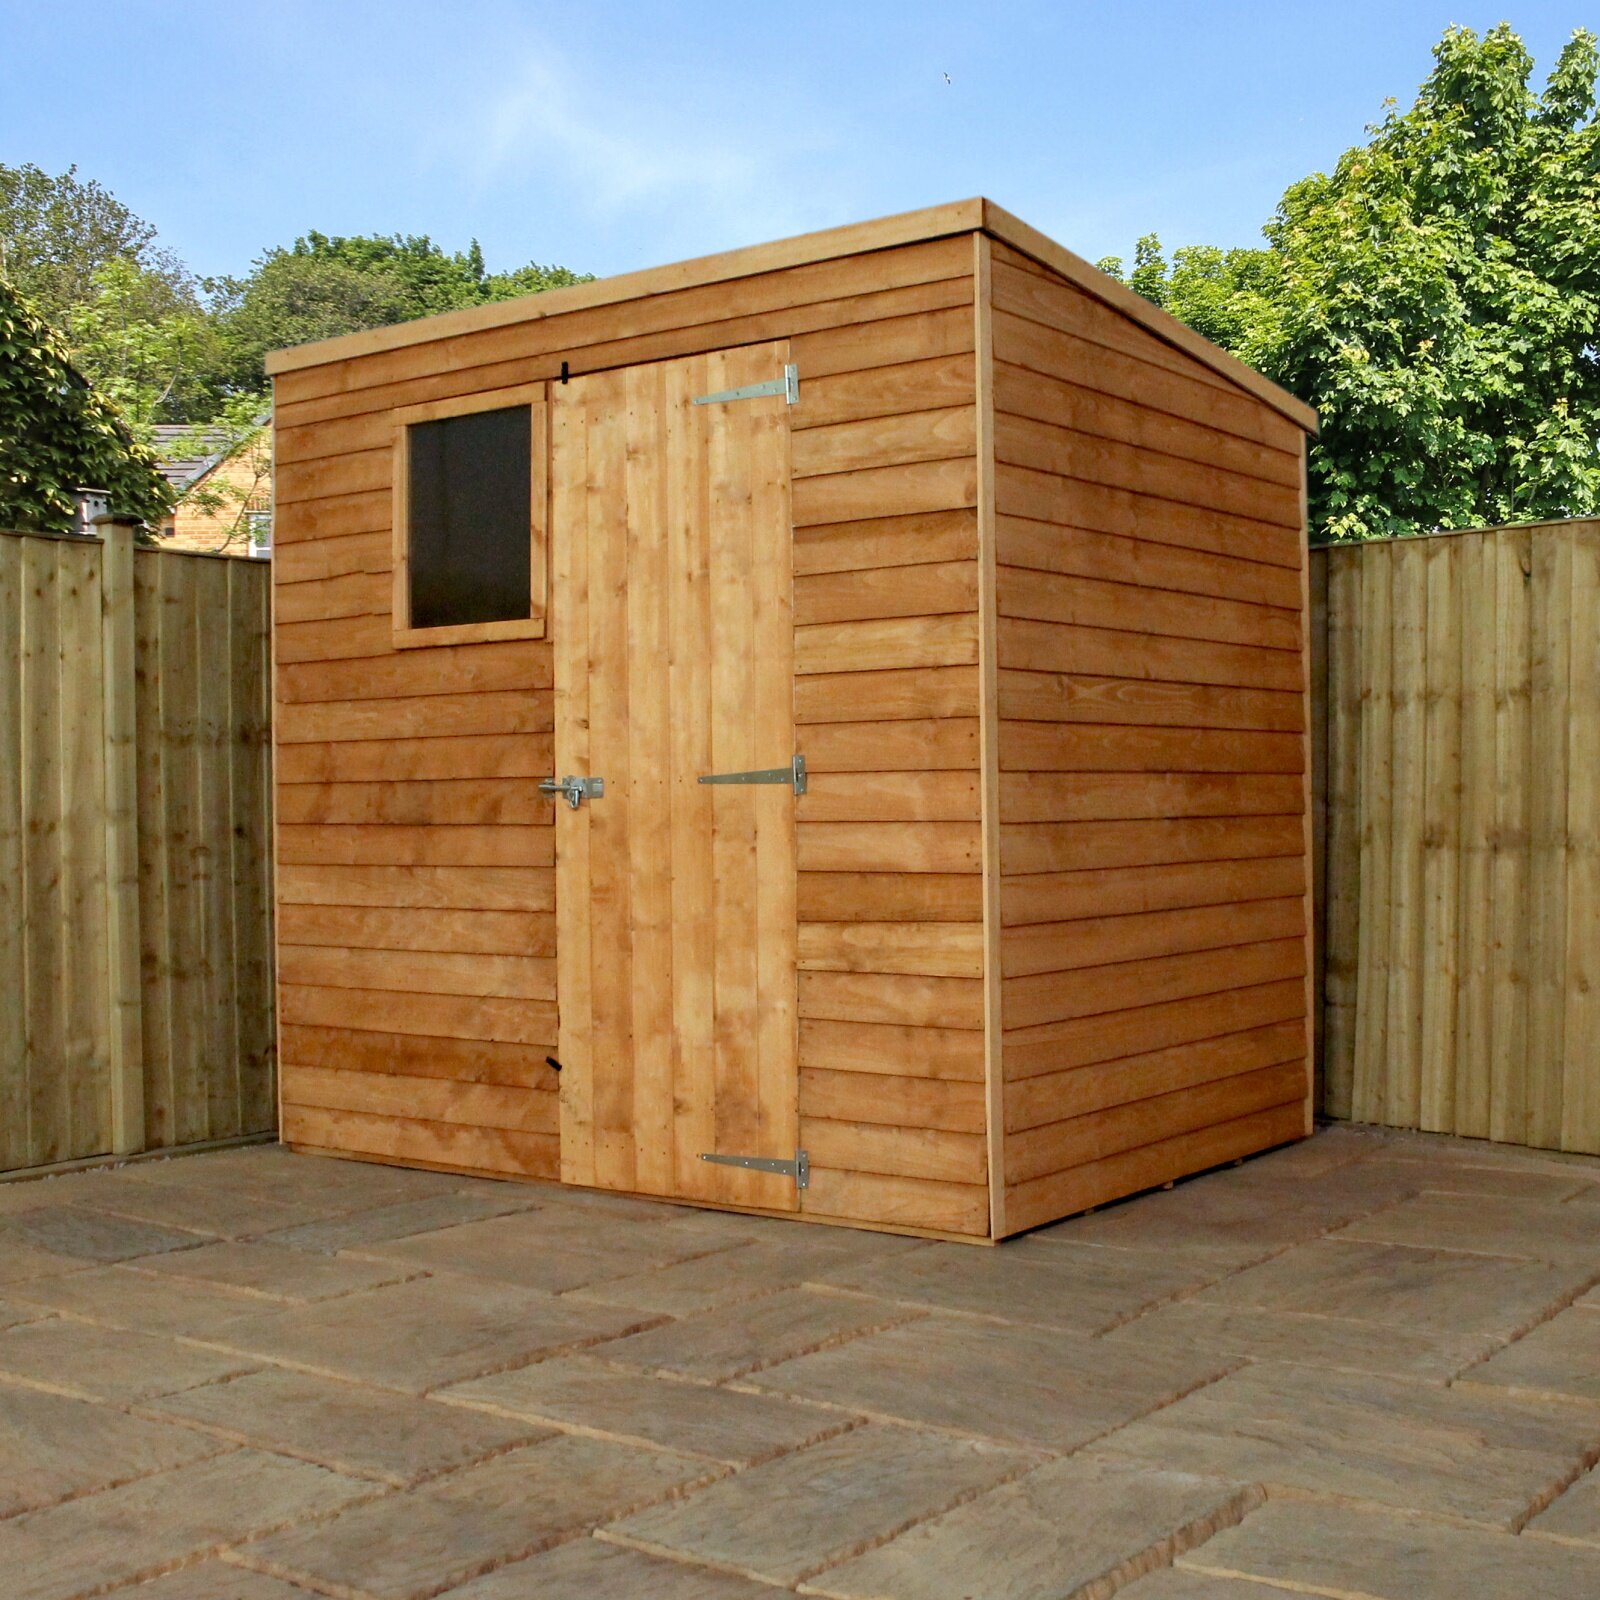 Mercia Garden Products 7 x 5 Wooden Storage Shed & Reviews | Wayfair UK